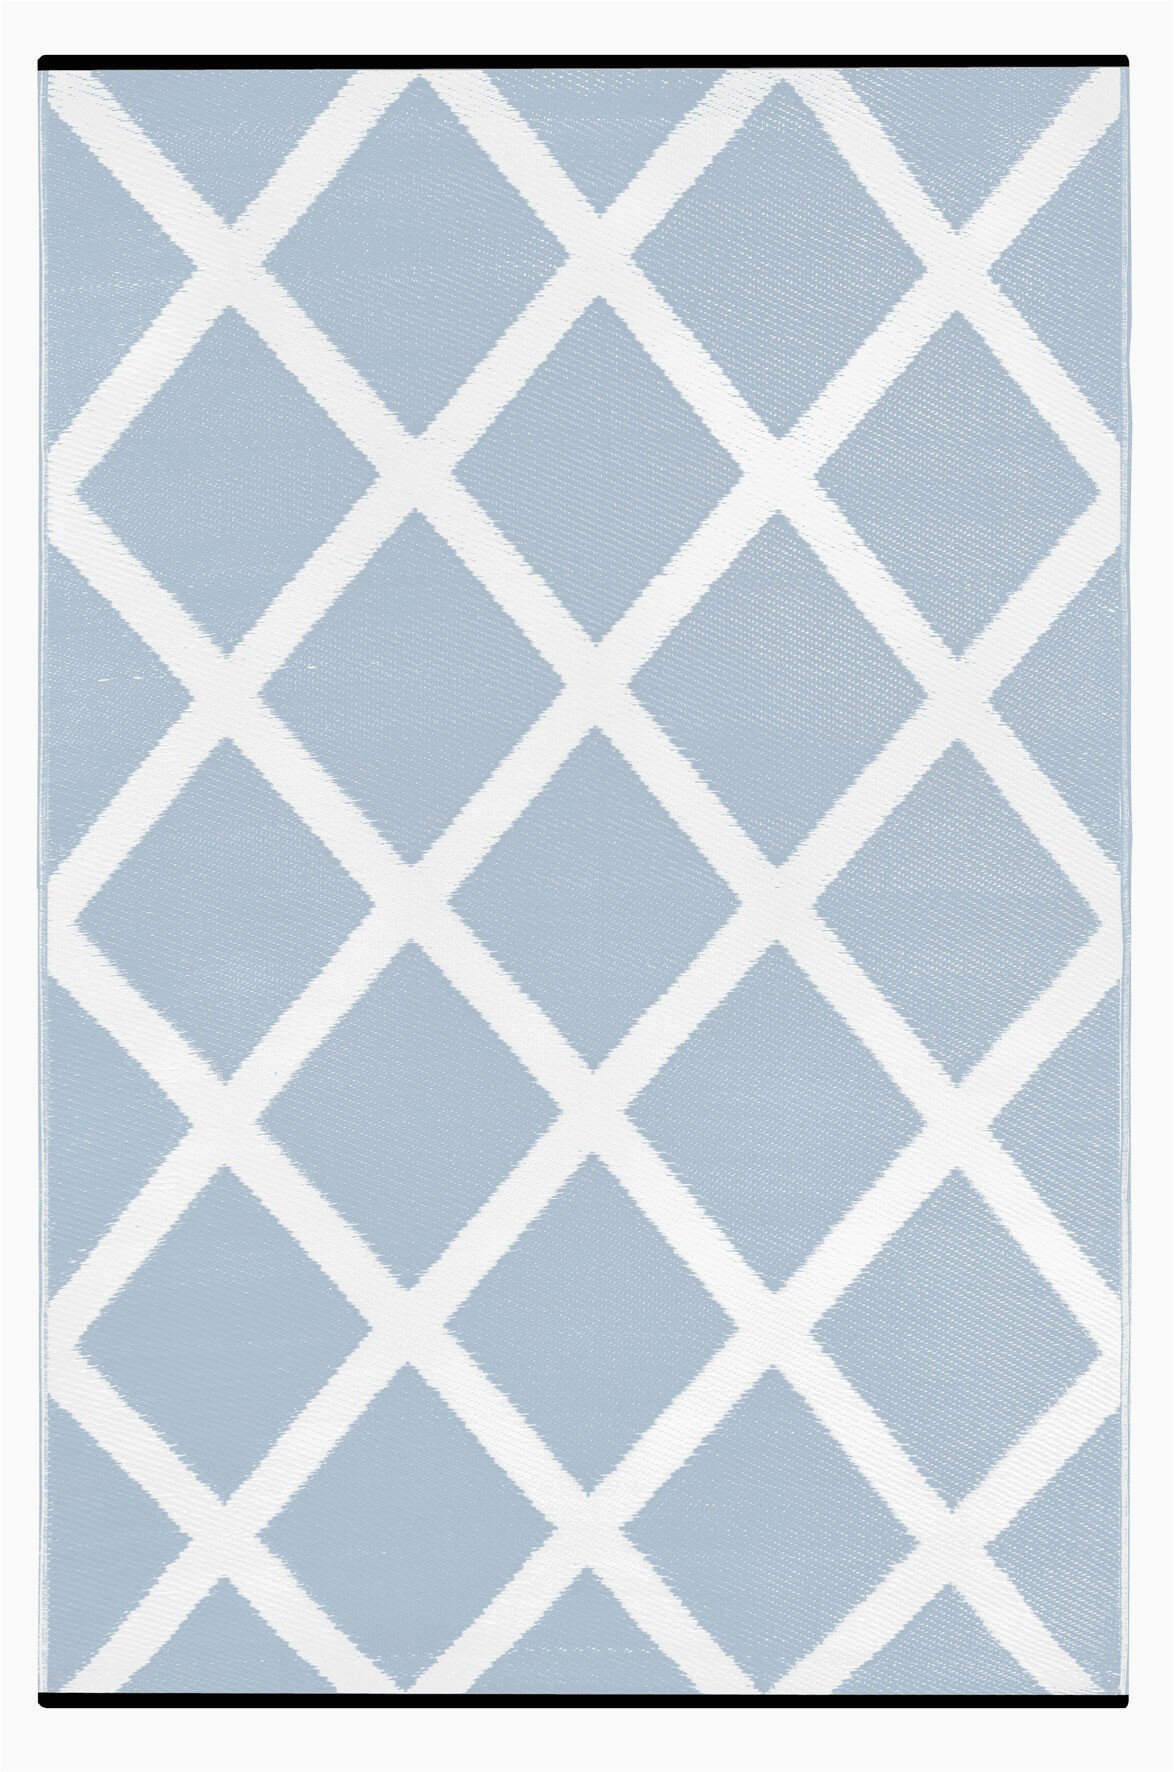 Blue and White Indoor Outdoor Rug Lightweight Reversible Diamond Light Blue White Indoor Outdoor area Rug